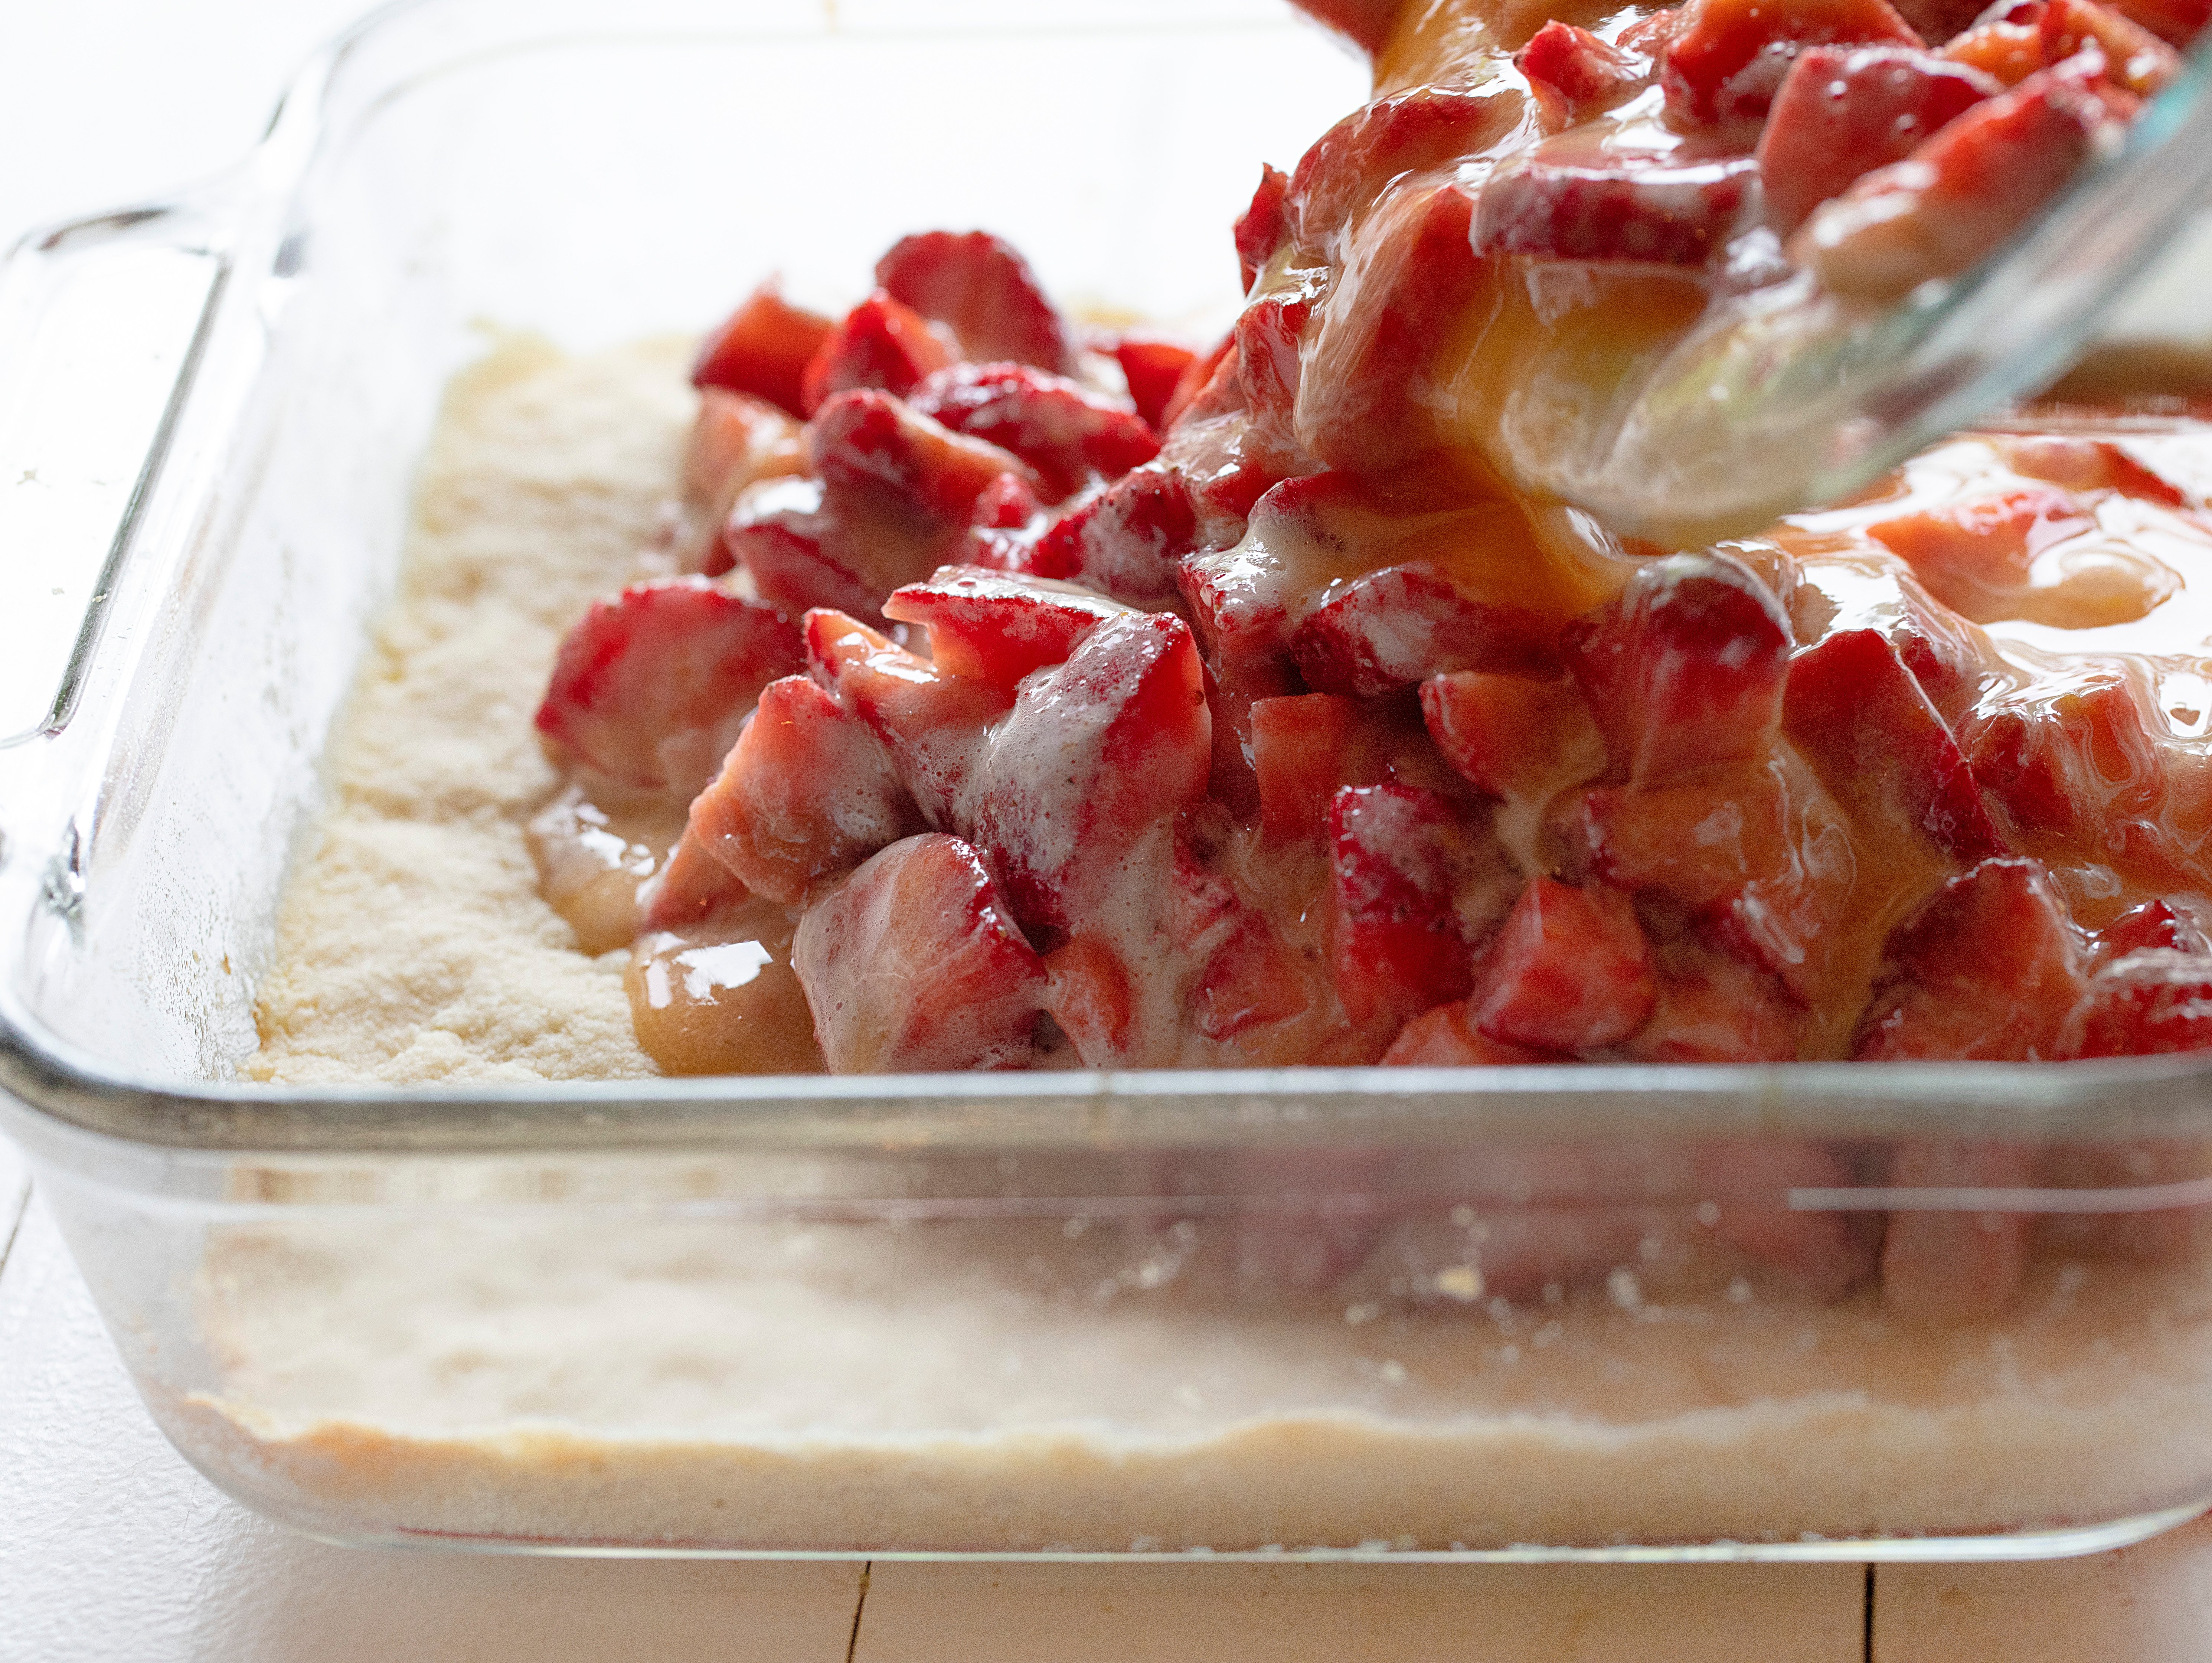 How to Make Strawberry Bars